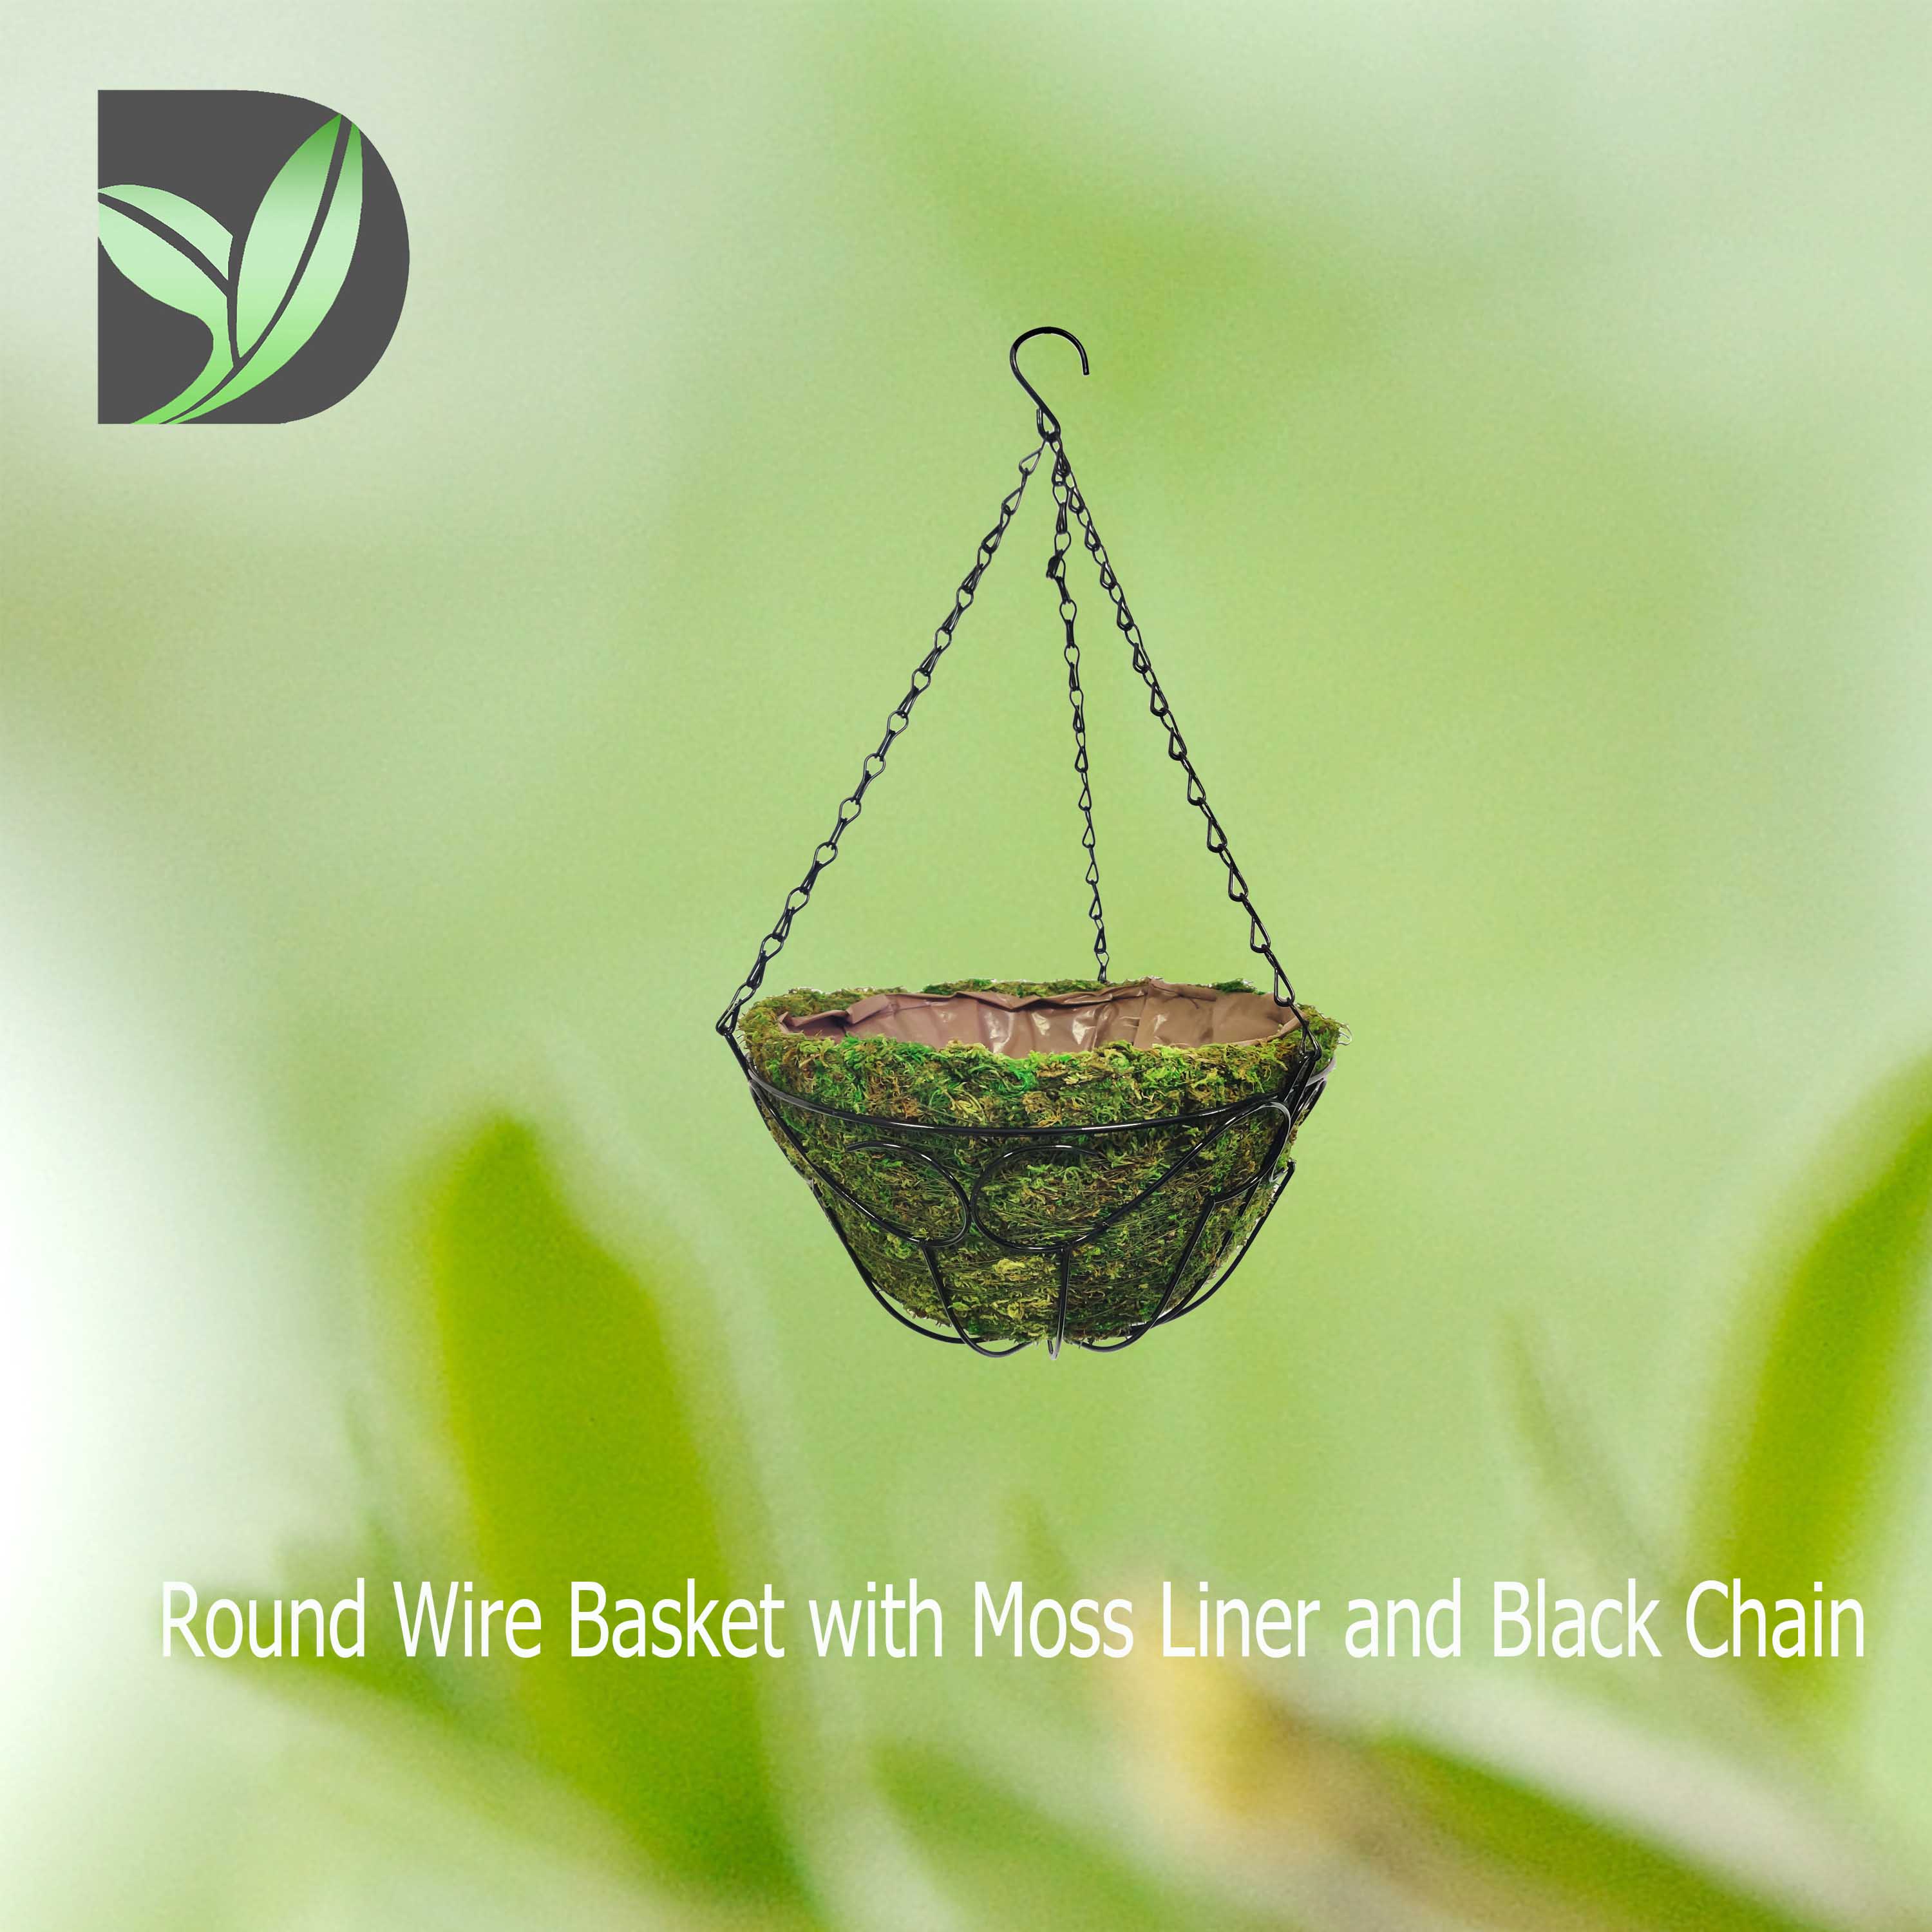 Round Wire Basket with Moss Liner and Black Chain